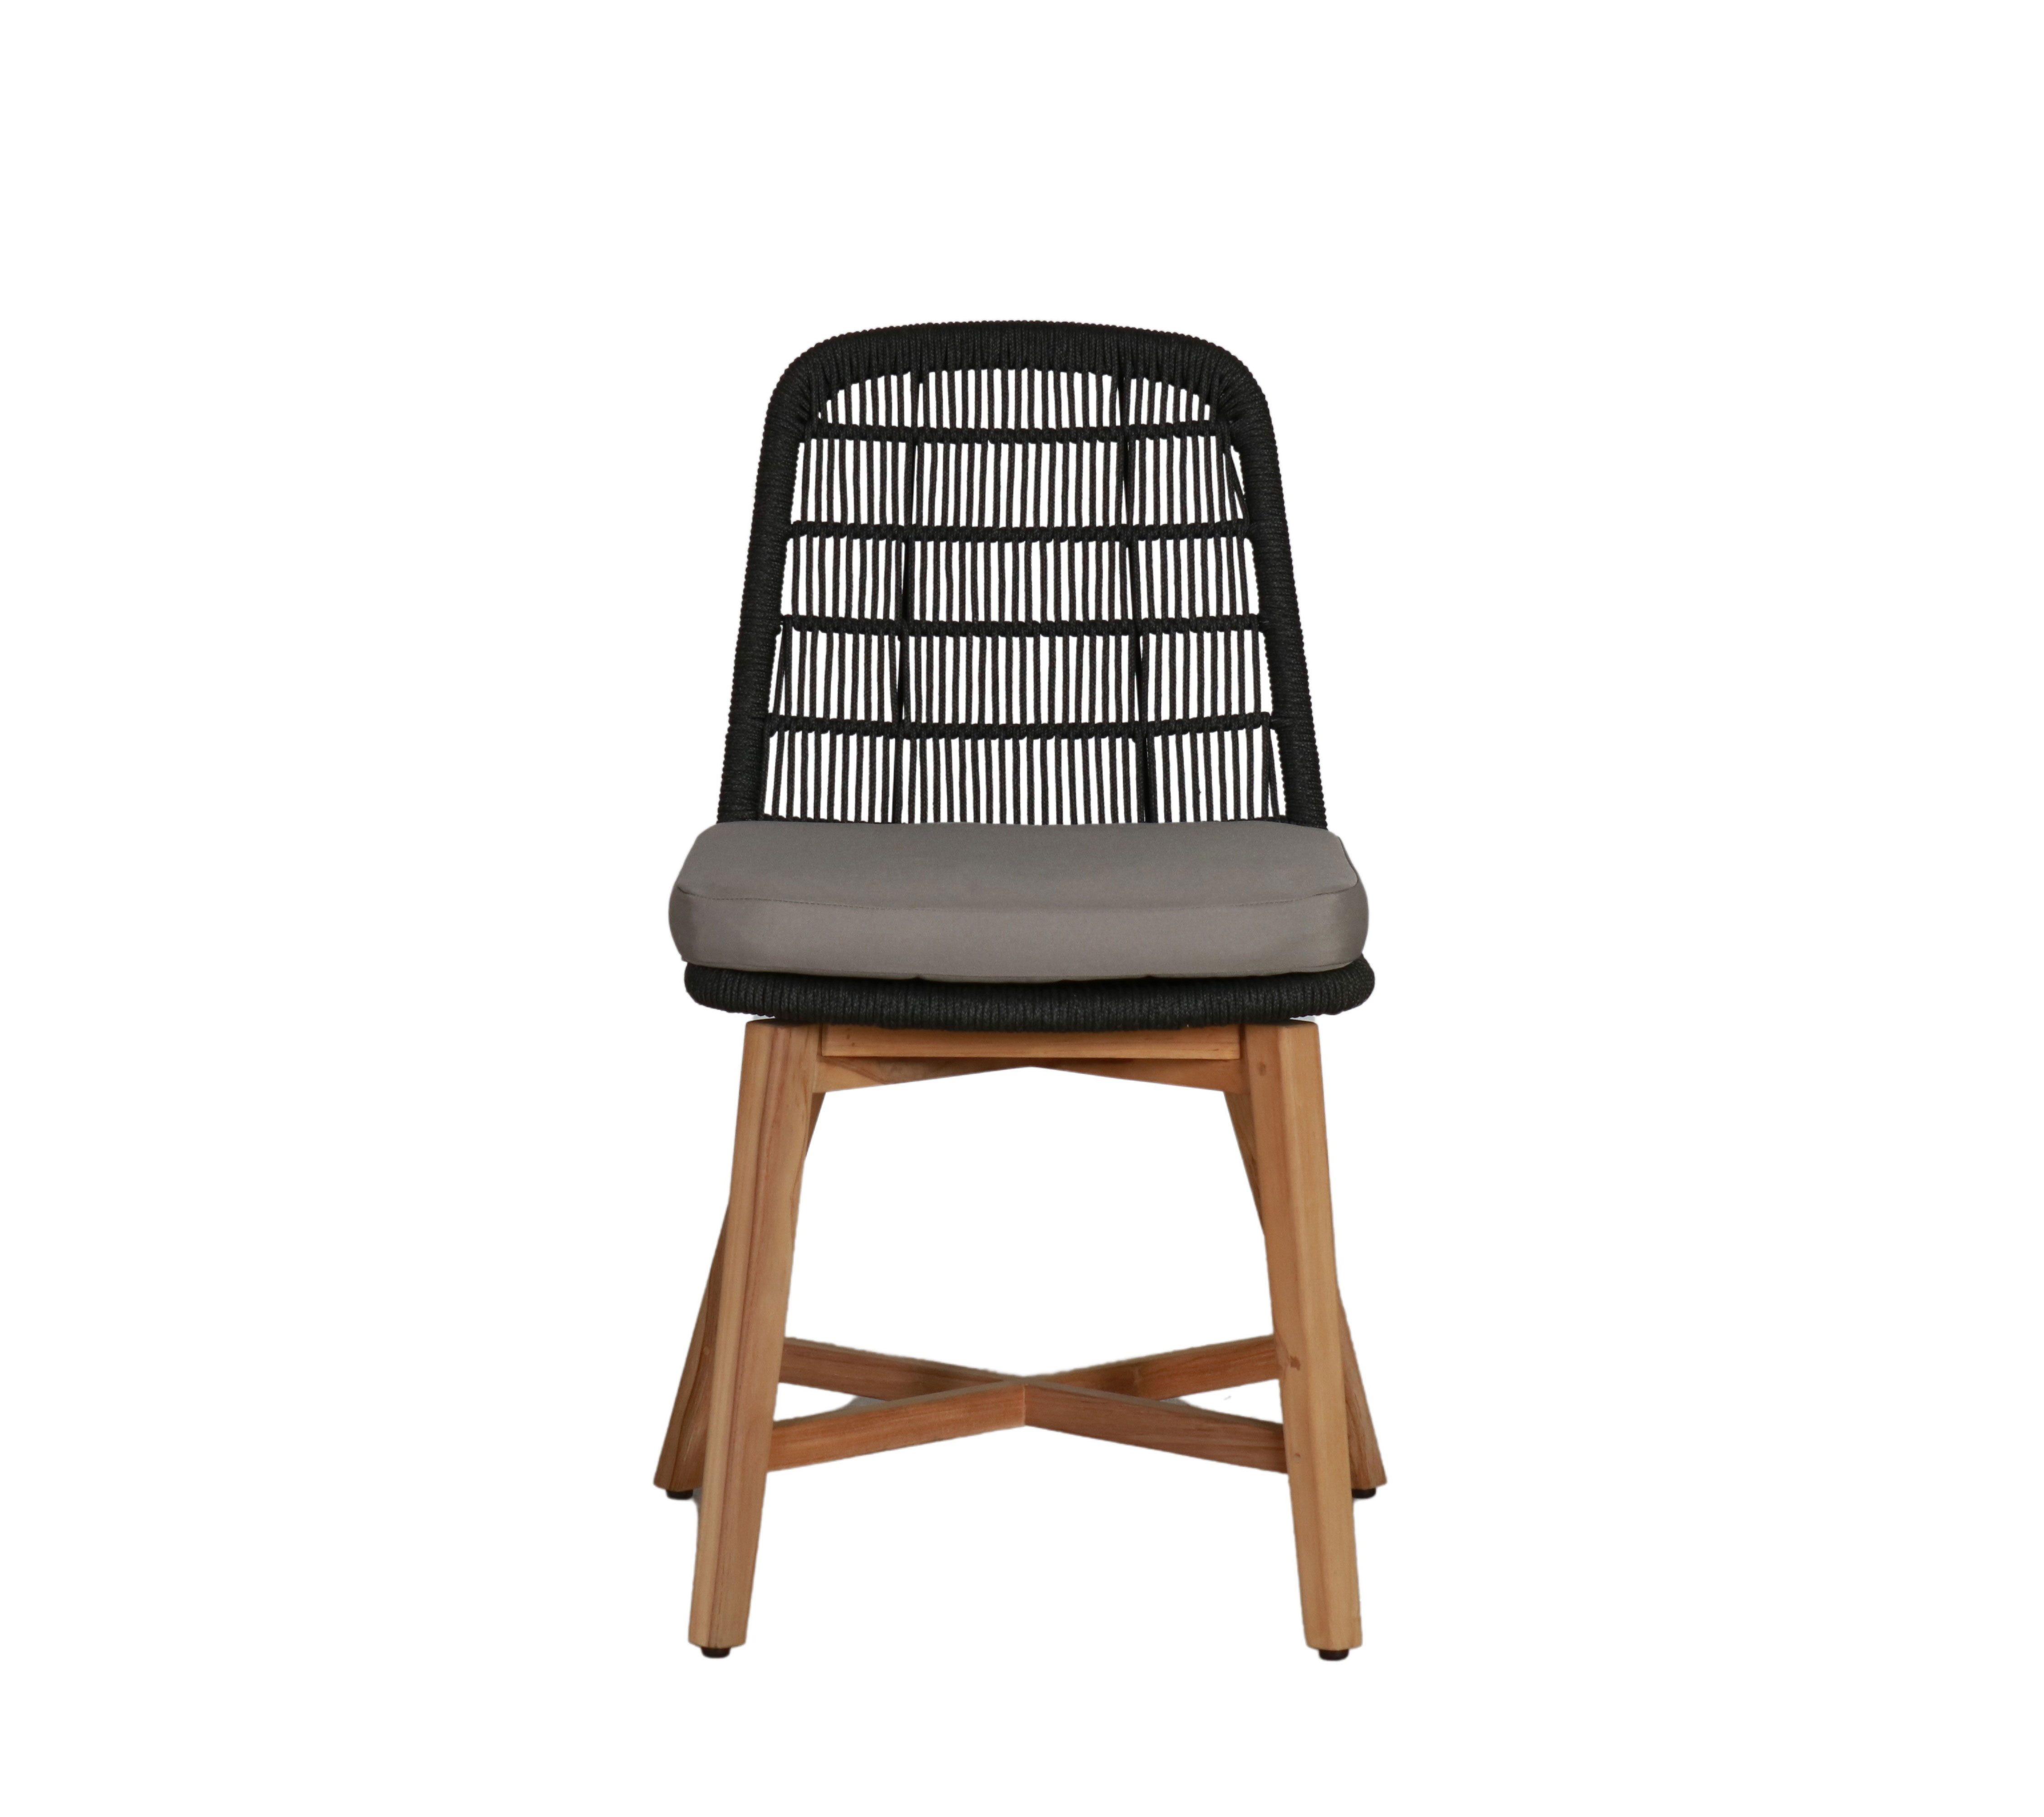 outdoor teak dining chair with seat cushion 